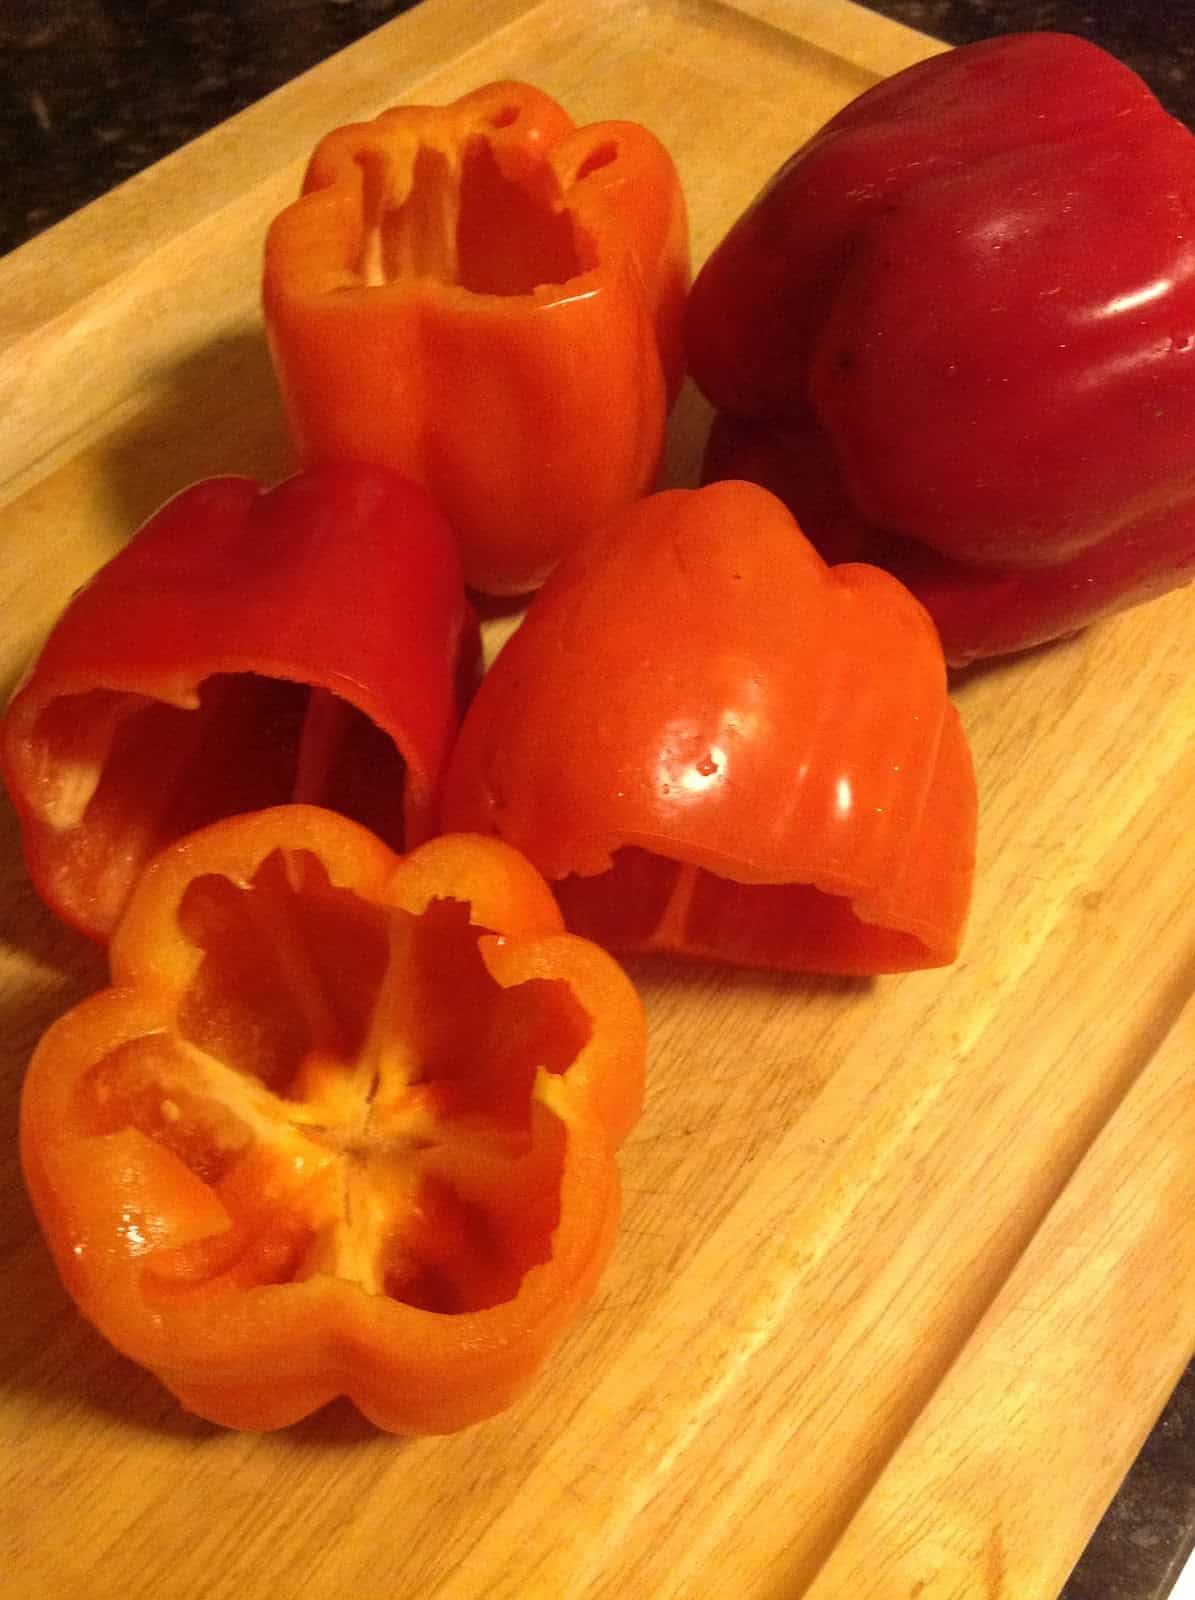 Peppers being prepped